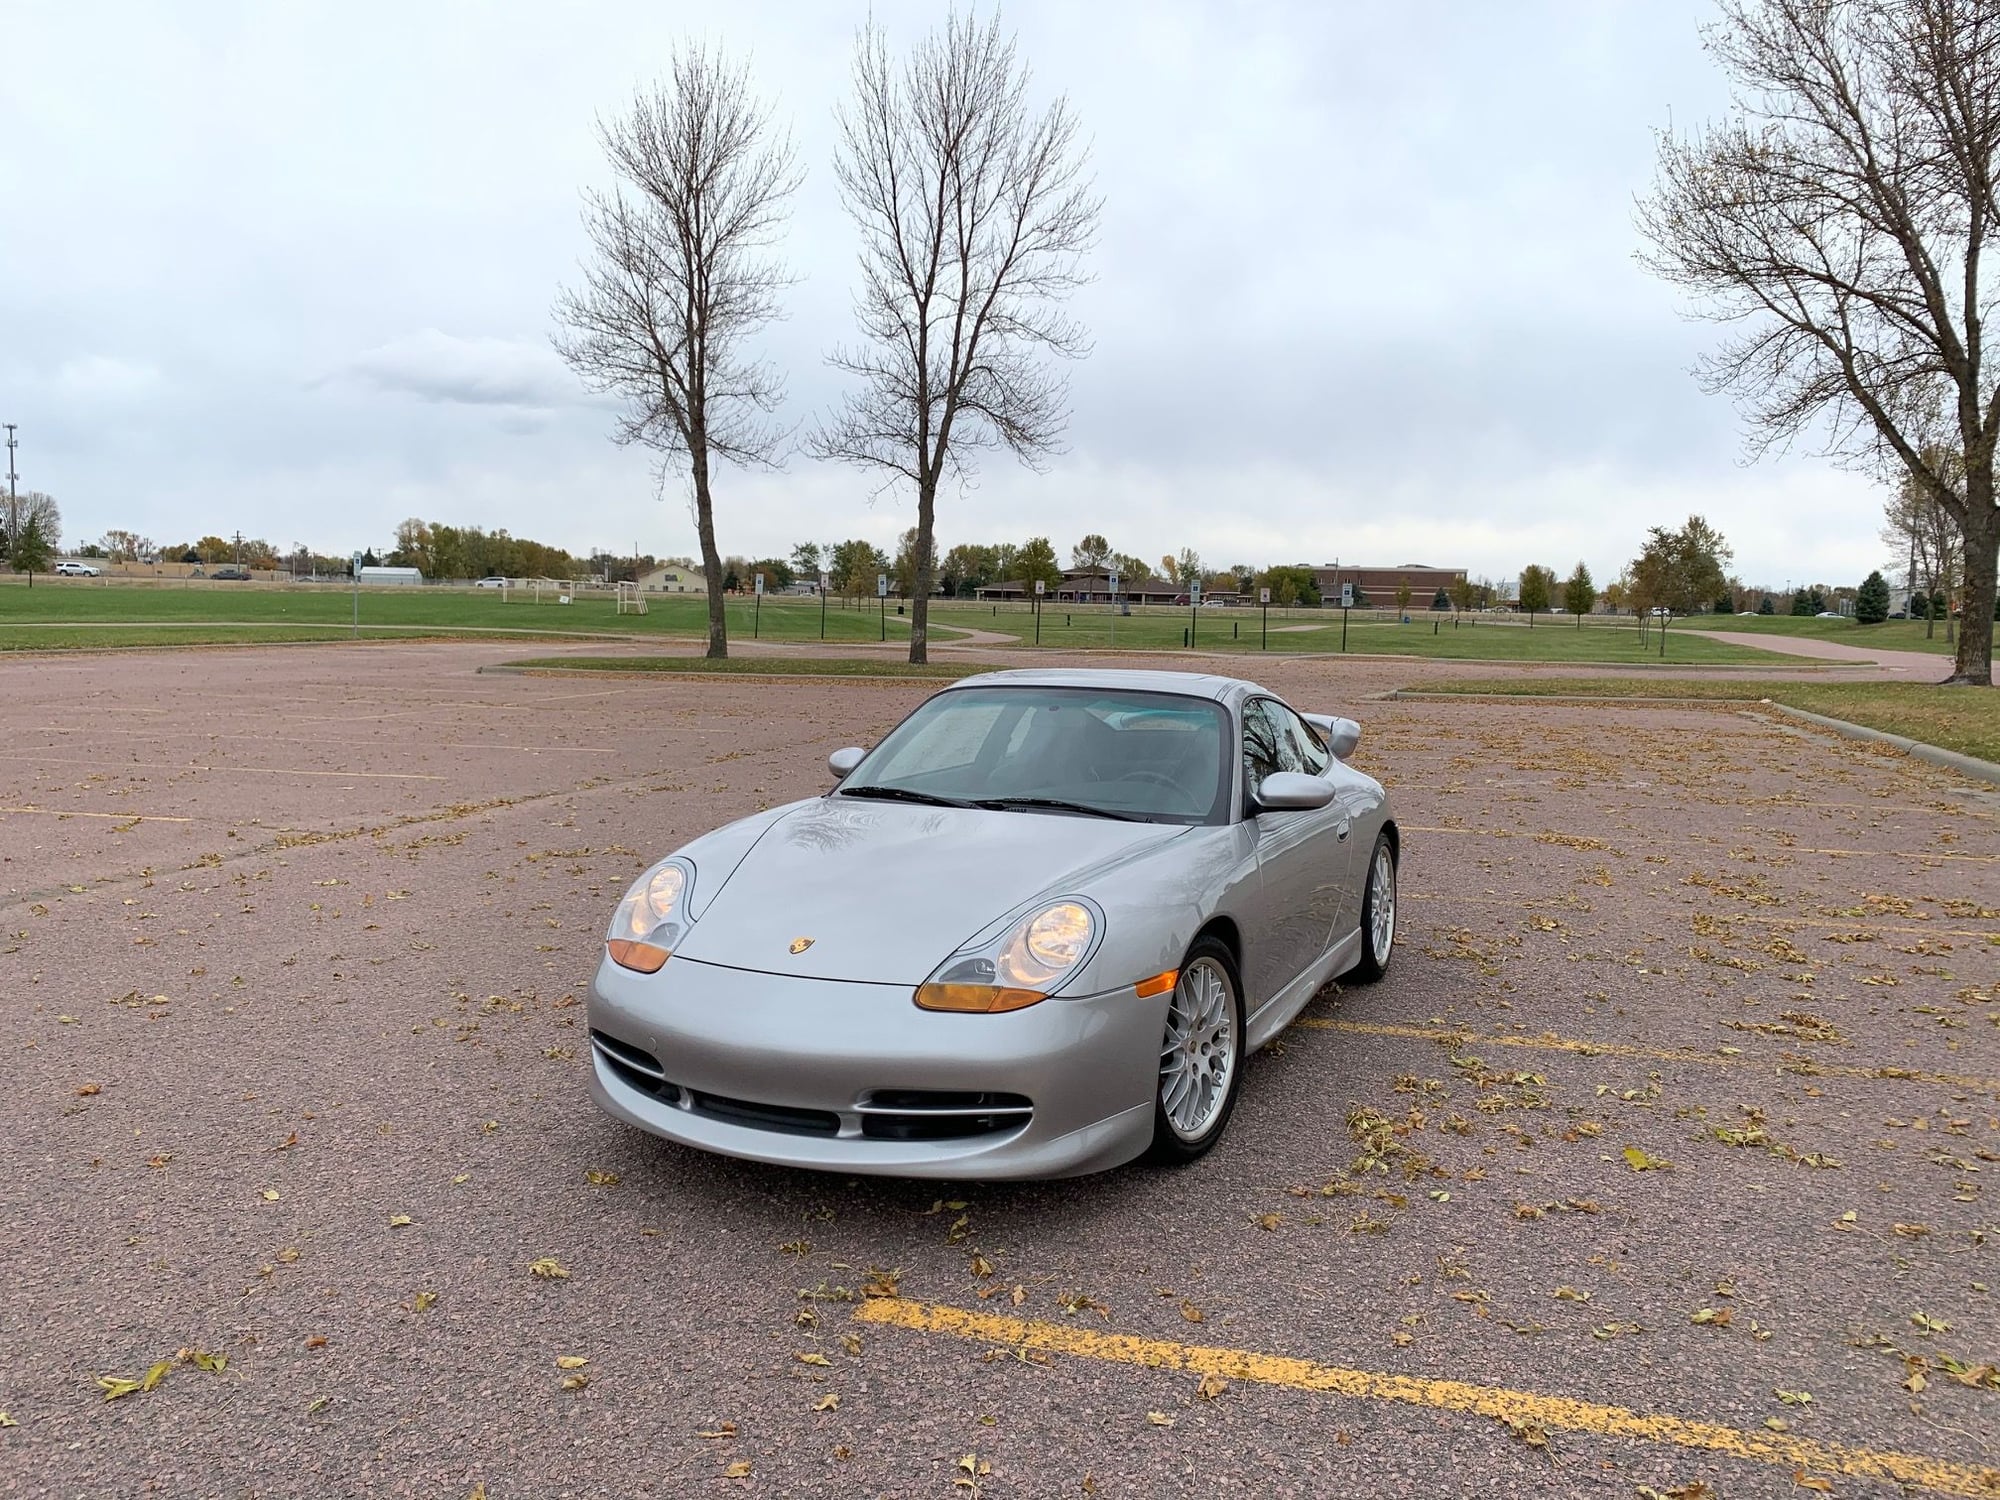 1999 Porsche 911 - 1999 Factory Aerokit 911 17,xxx Original Miles - Used - VIN WP0AA2998XS622665 - 19,000 Miles - 6 cyl - 2WD - Manual - Coupe - Silver - Sioux Falls, SD 57103, United States